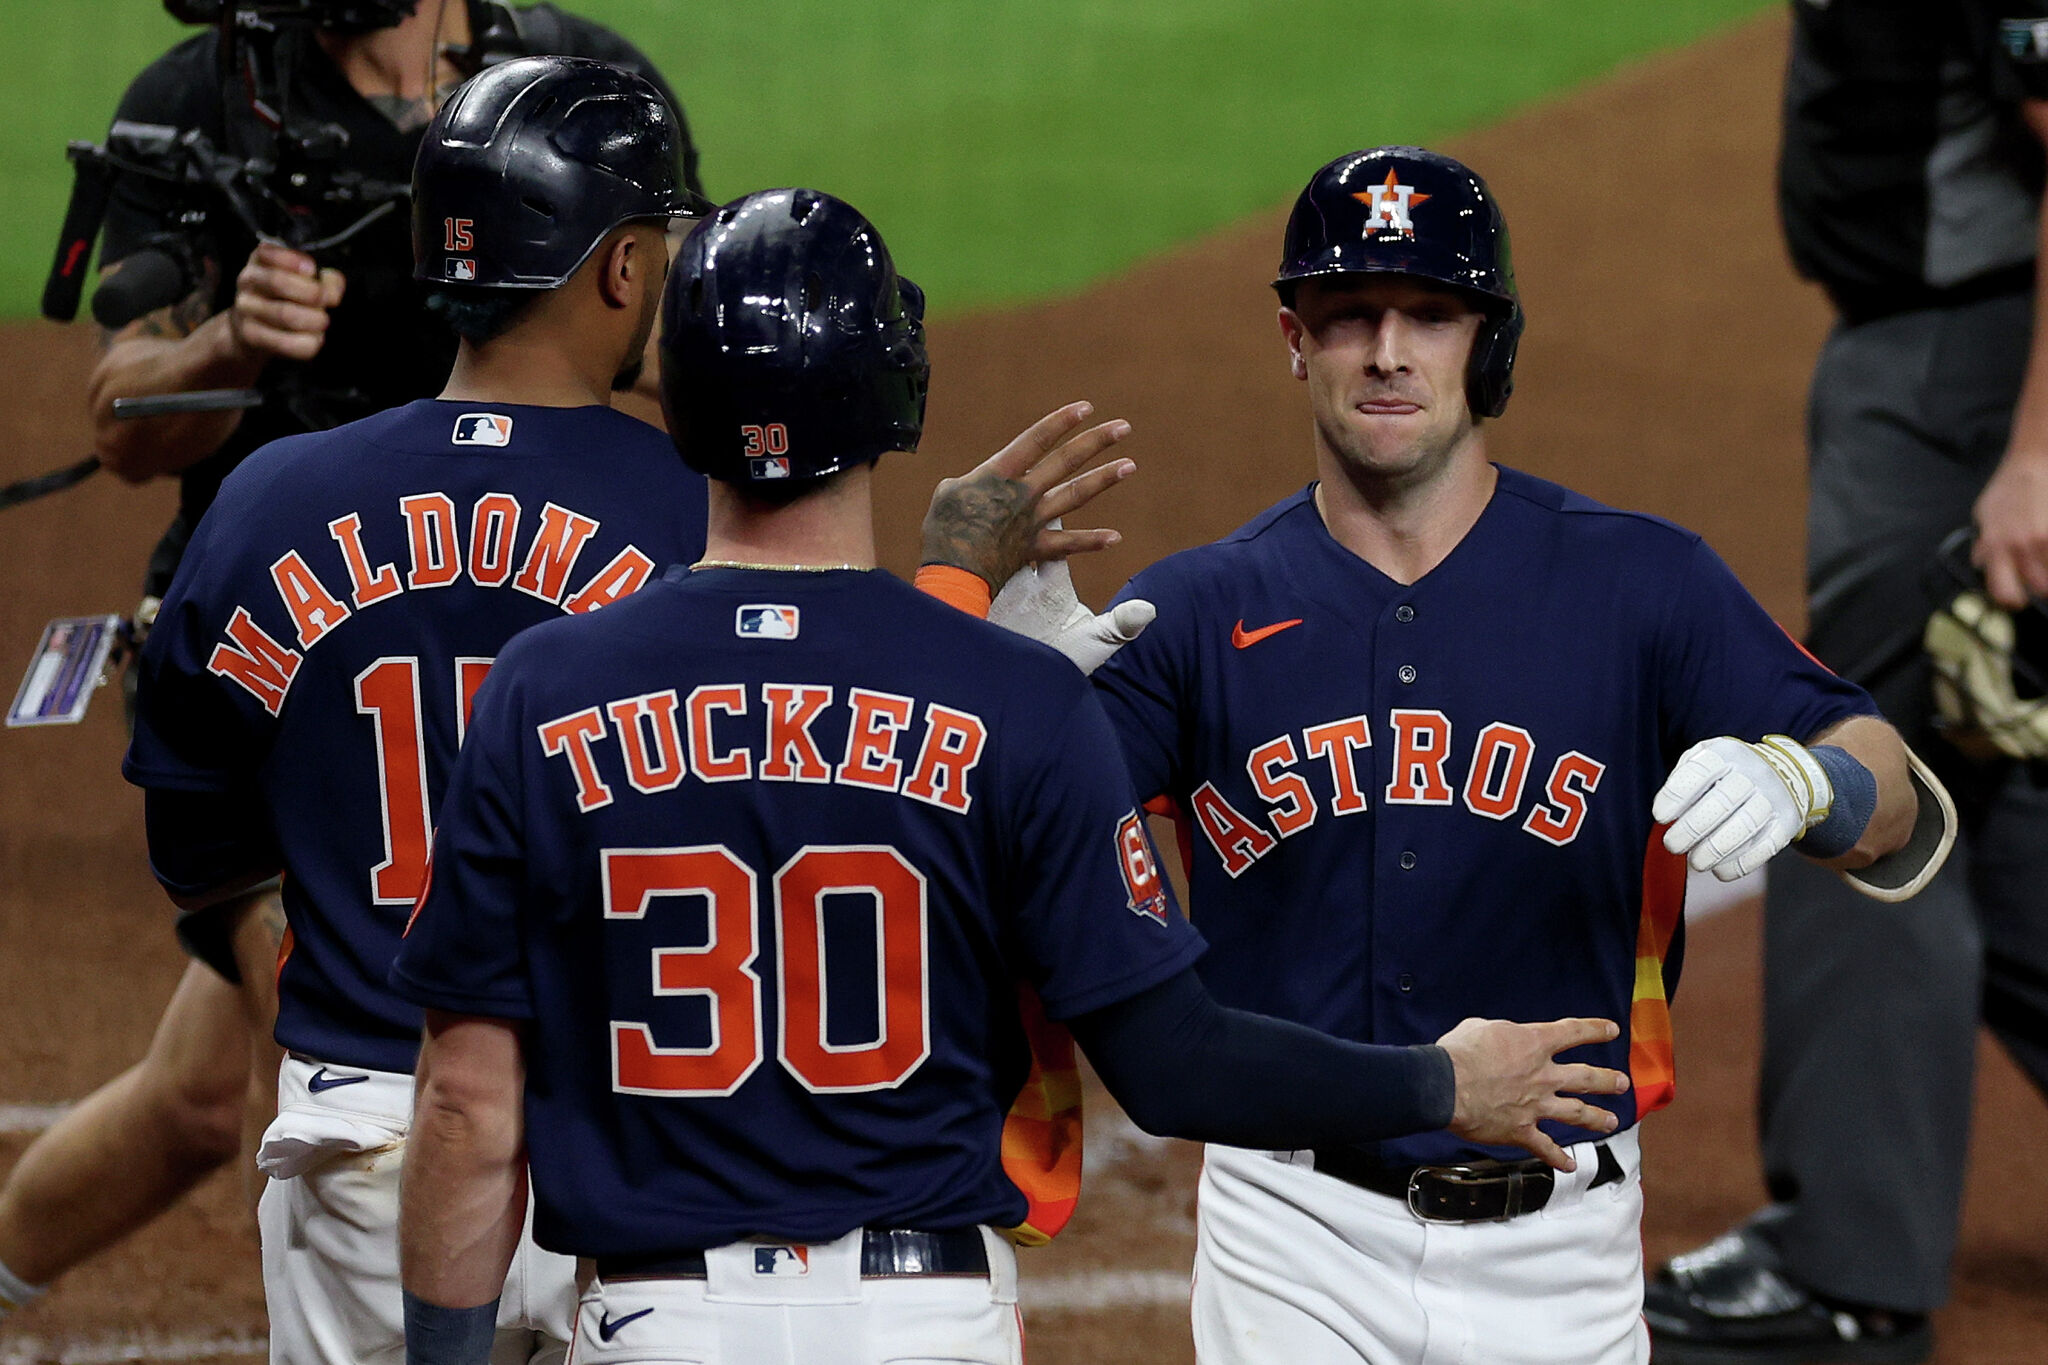 2022 MLB Playoffs: Yankees return to New York down 2-0 in ALCS vs. Astros